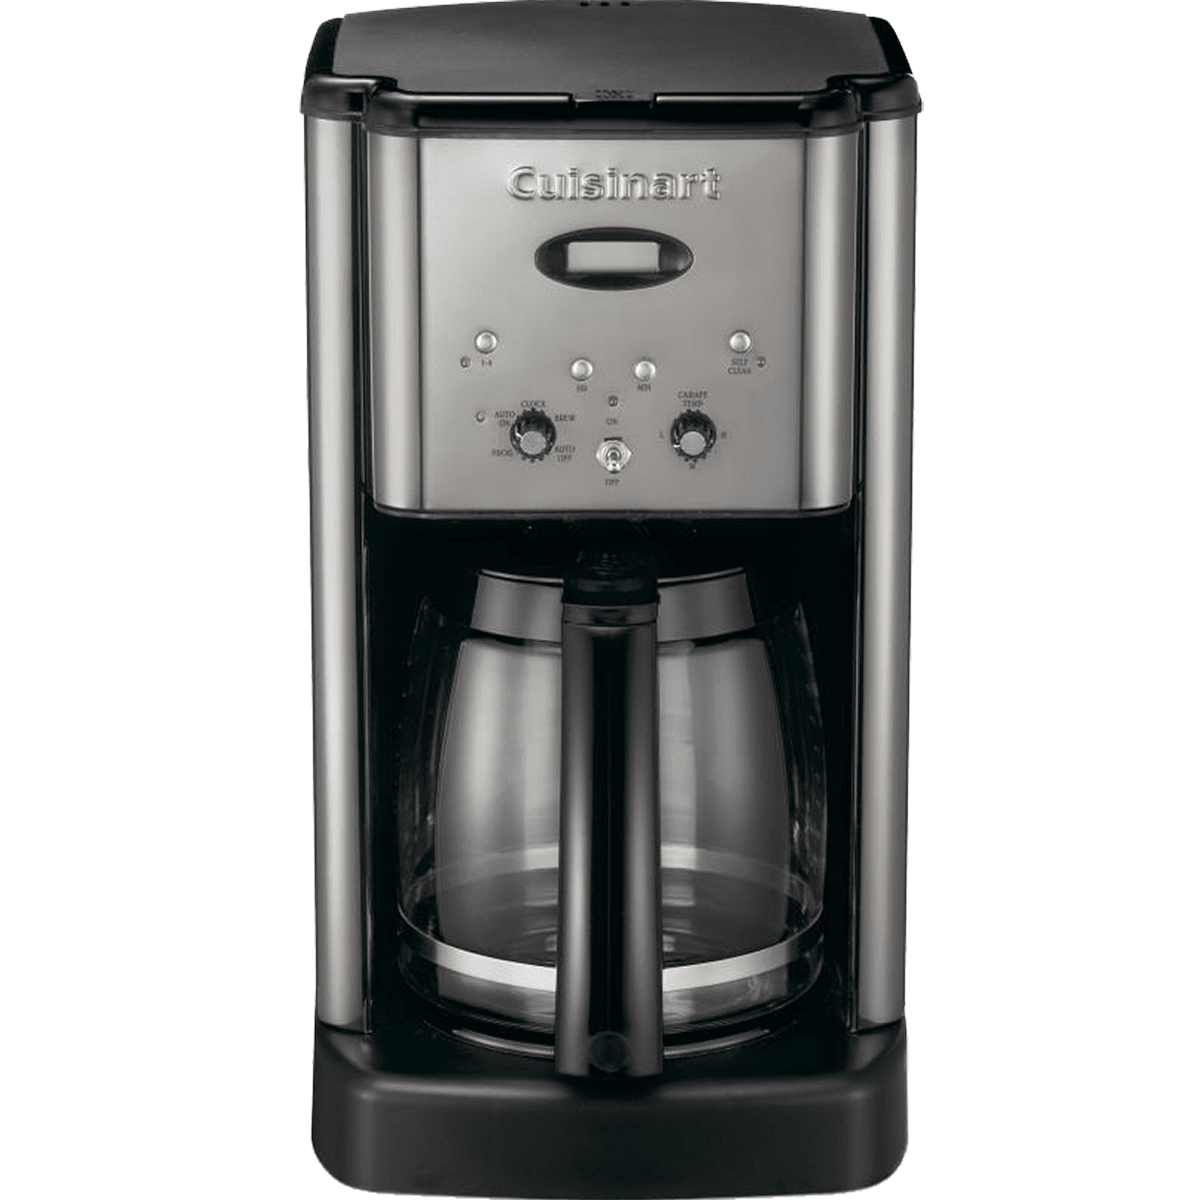 Cuisinart Brew Central 12-cup Programmable Coffee Maker - Stainless Steel